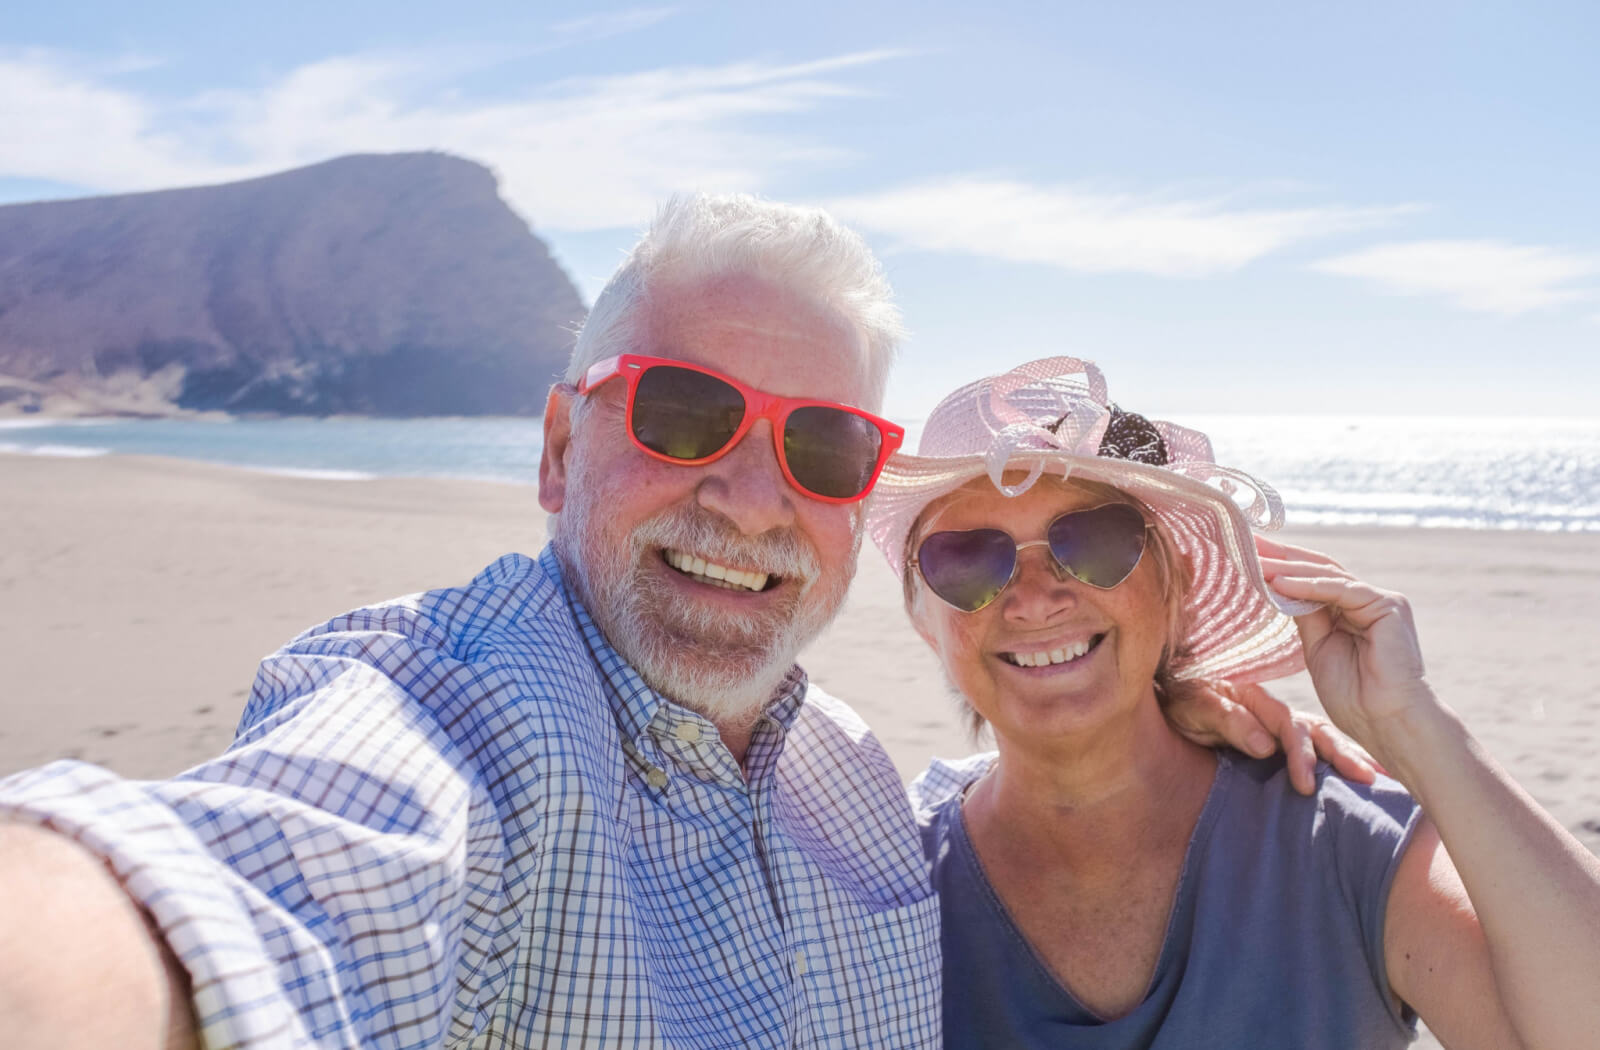 A male and female senior with their sunglasses on to protect their eyes from UV lights while enjoying the sun at the beach.